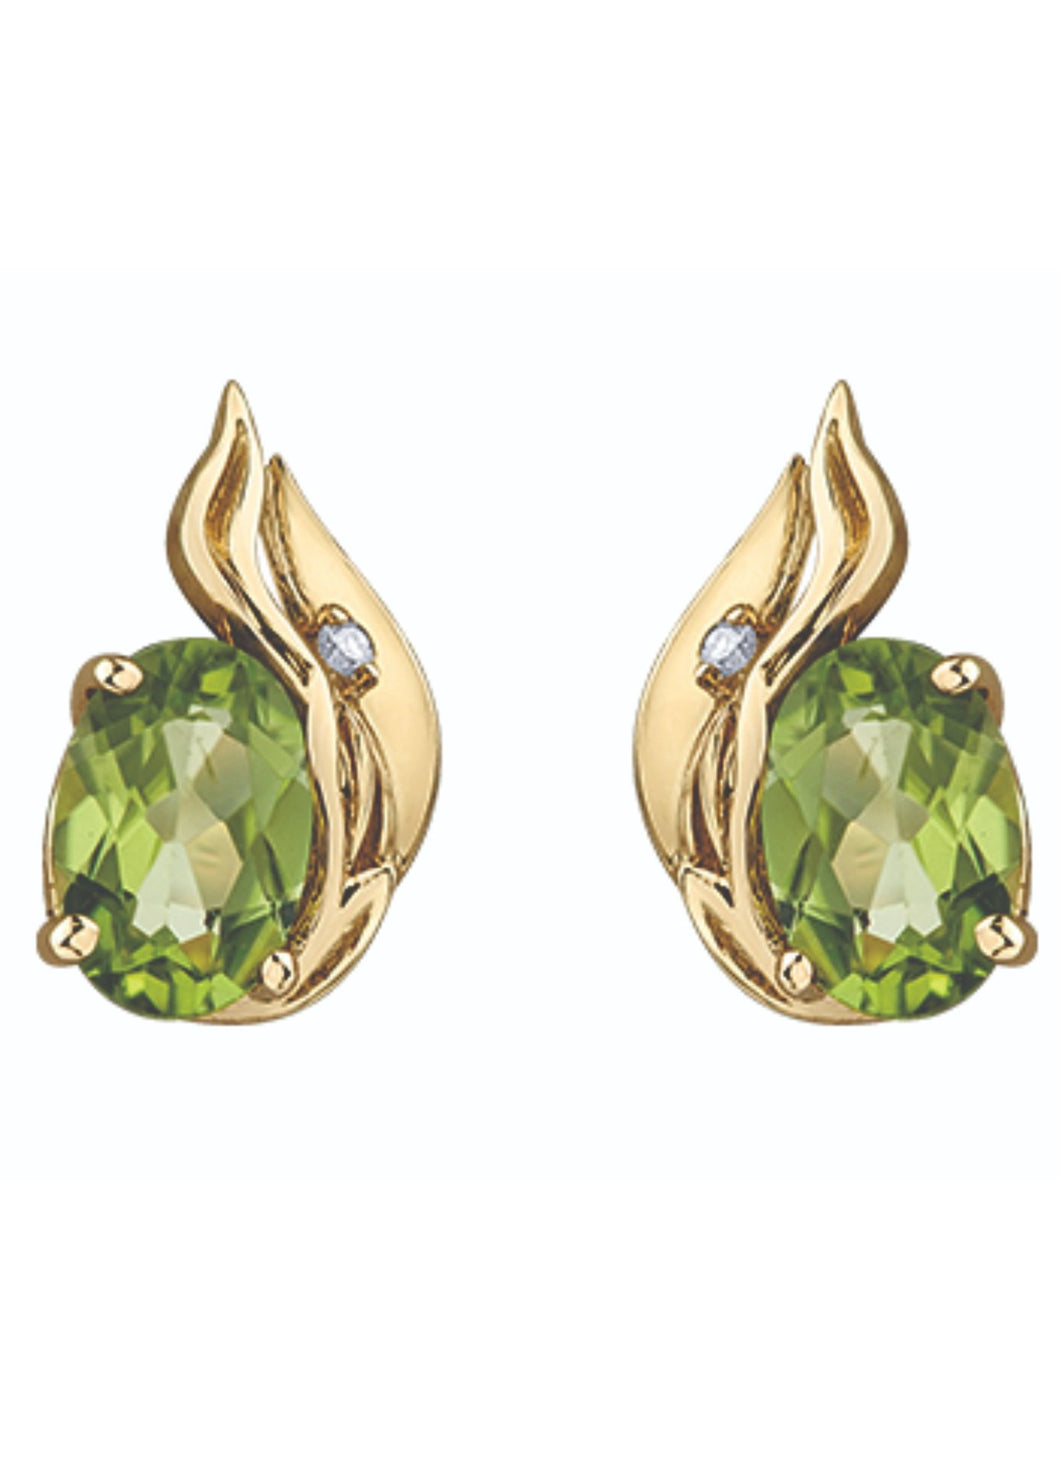 180074 10KT Yellow Gold with Diamond and Peridot Stud Earrings